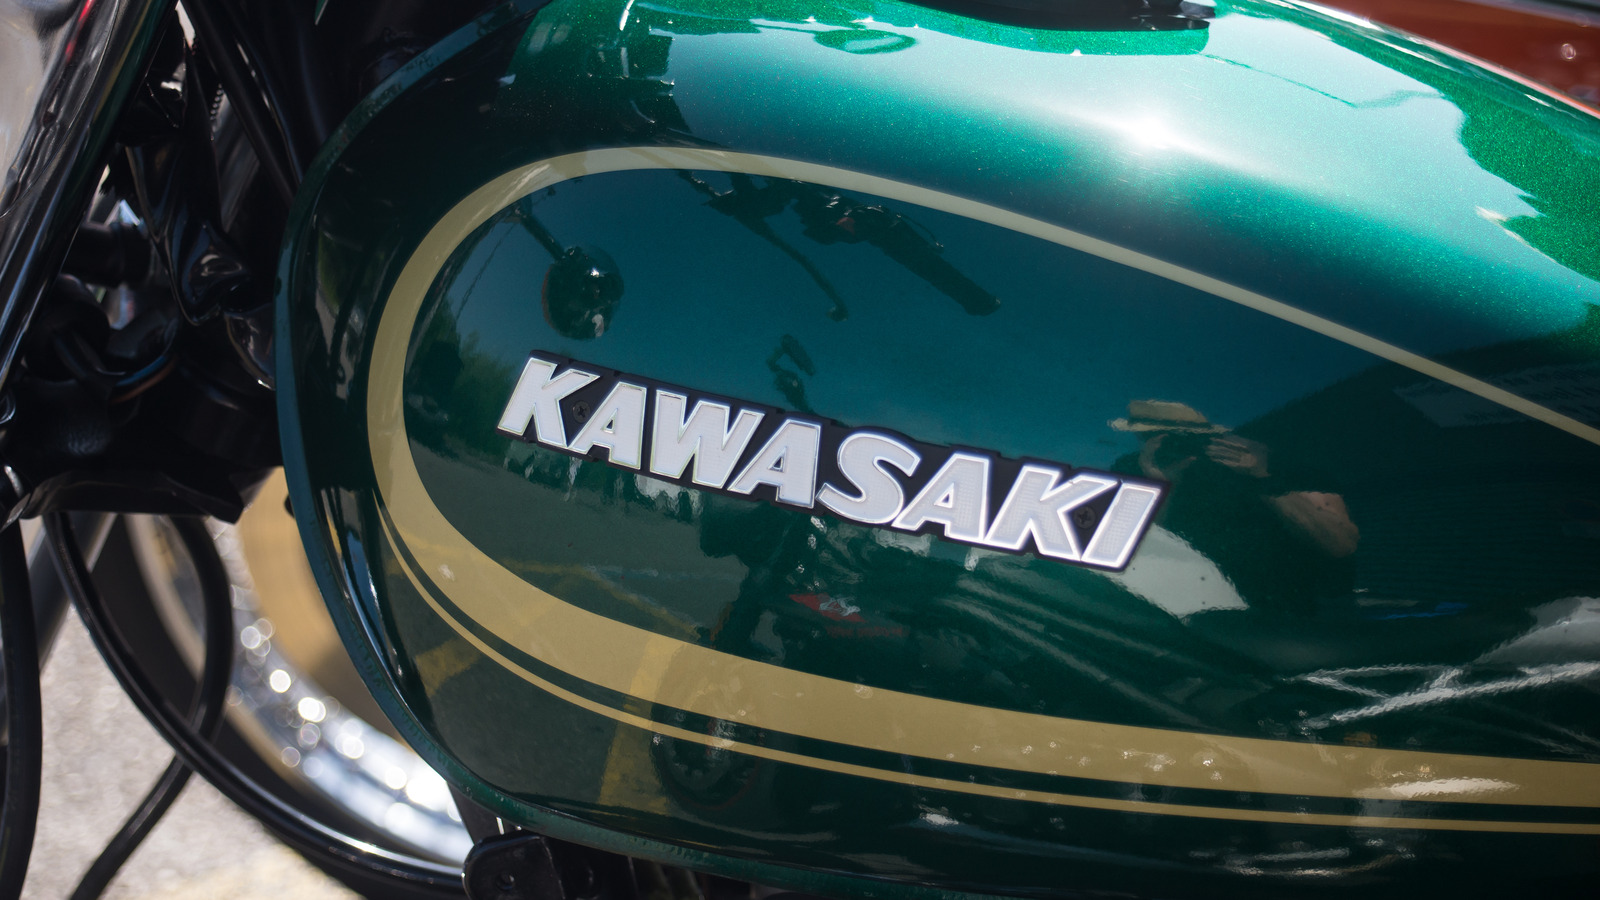 Where Are Kawasaki Motorcycles Made, And Who Owns The Company Now?